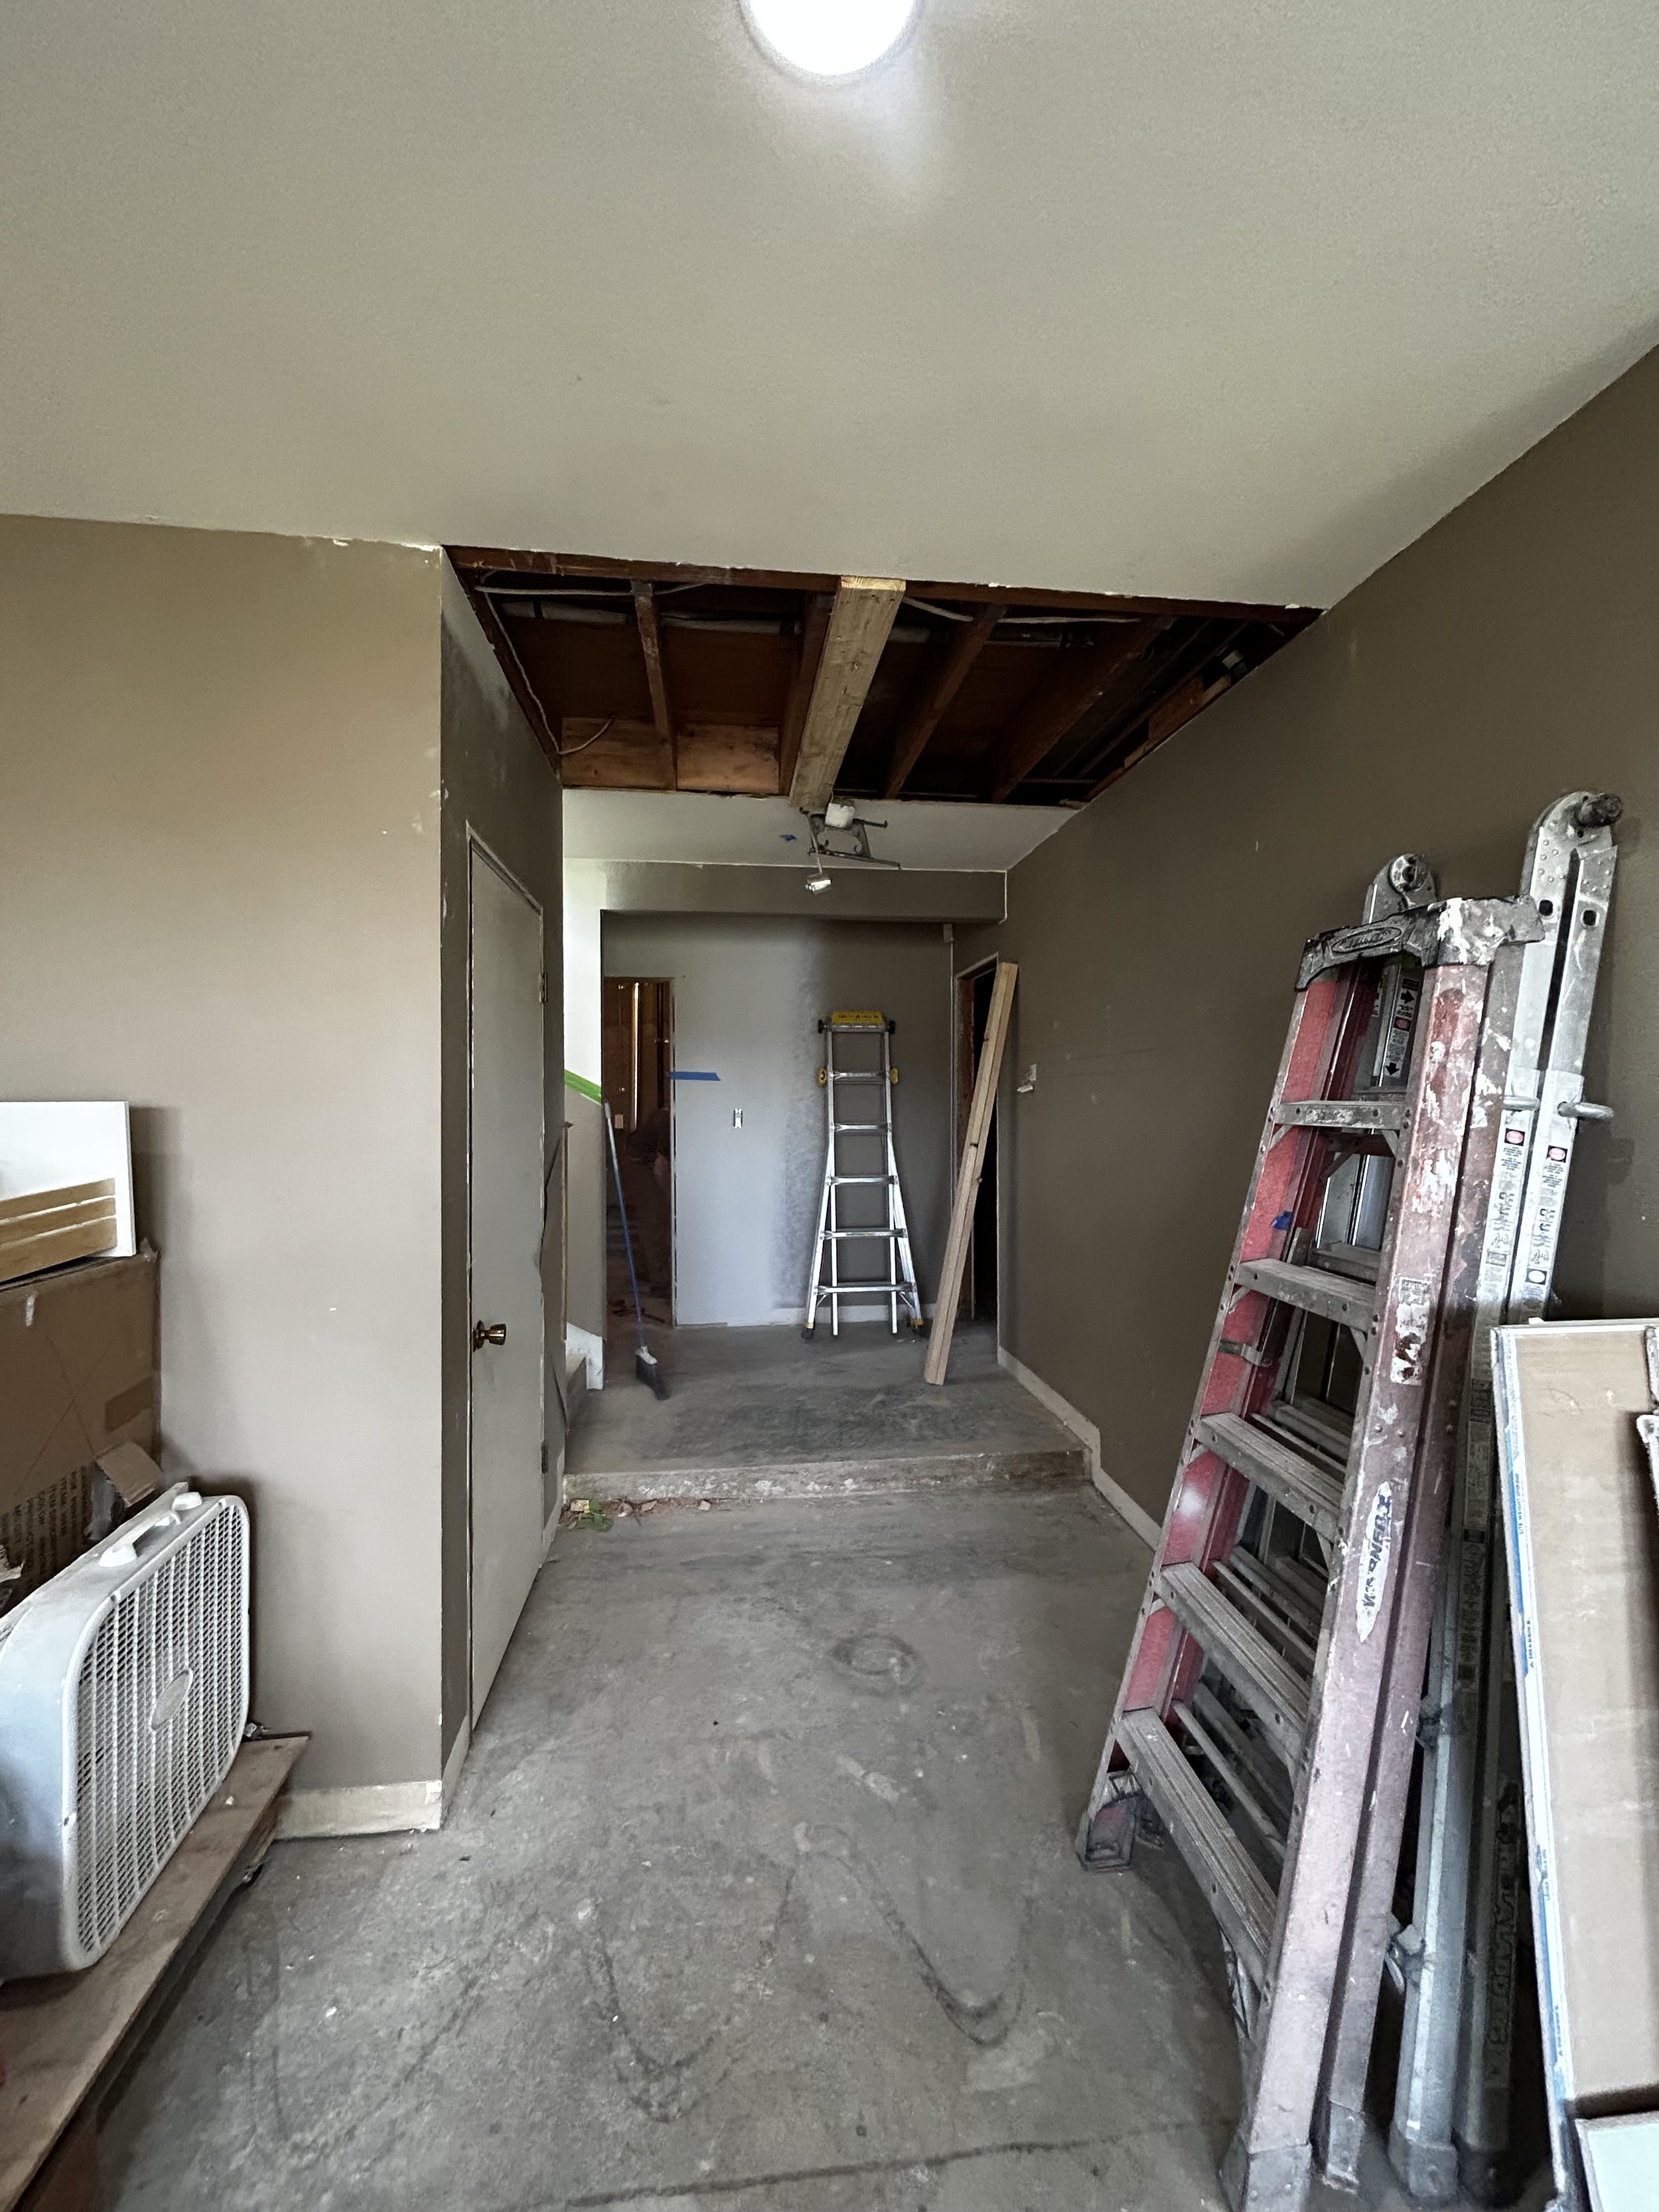 Home Renovation Seattle WA: Framing Out a Wall for Space and Privacy